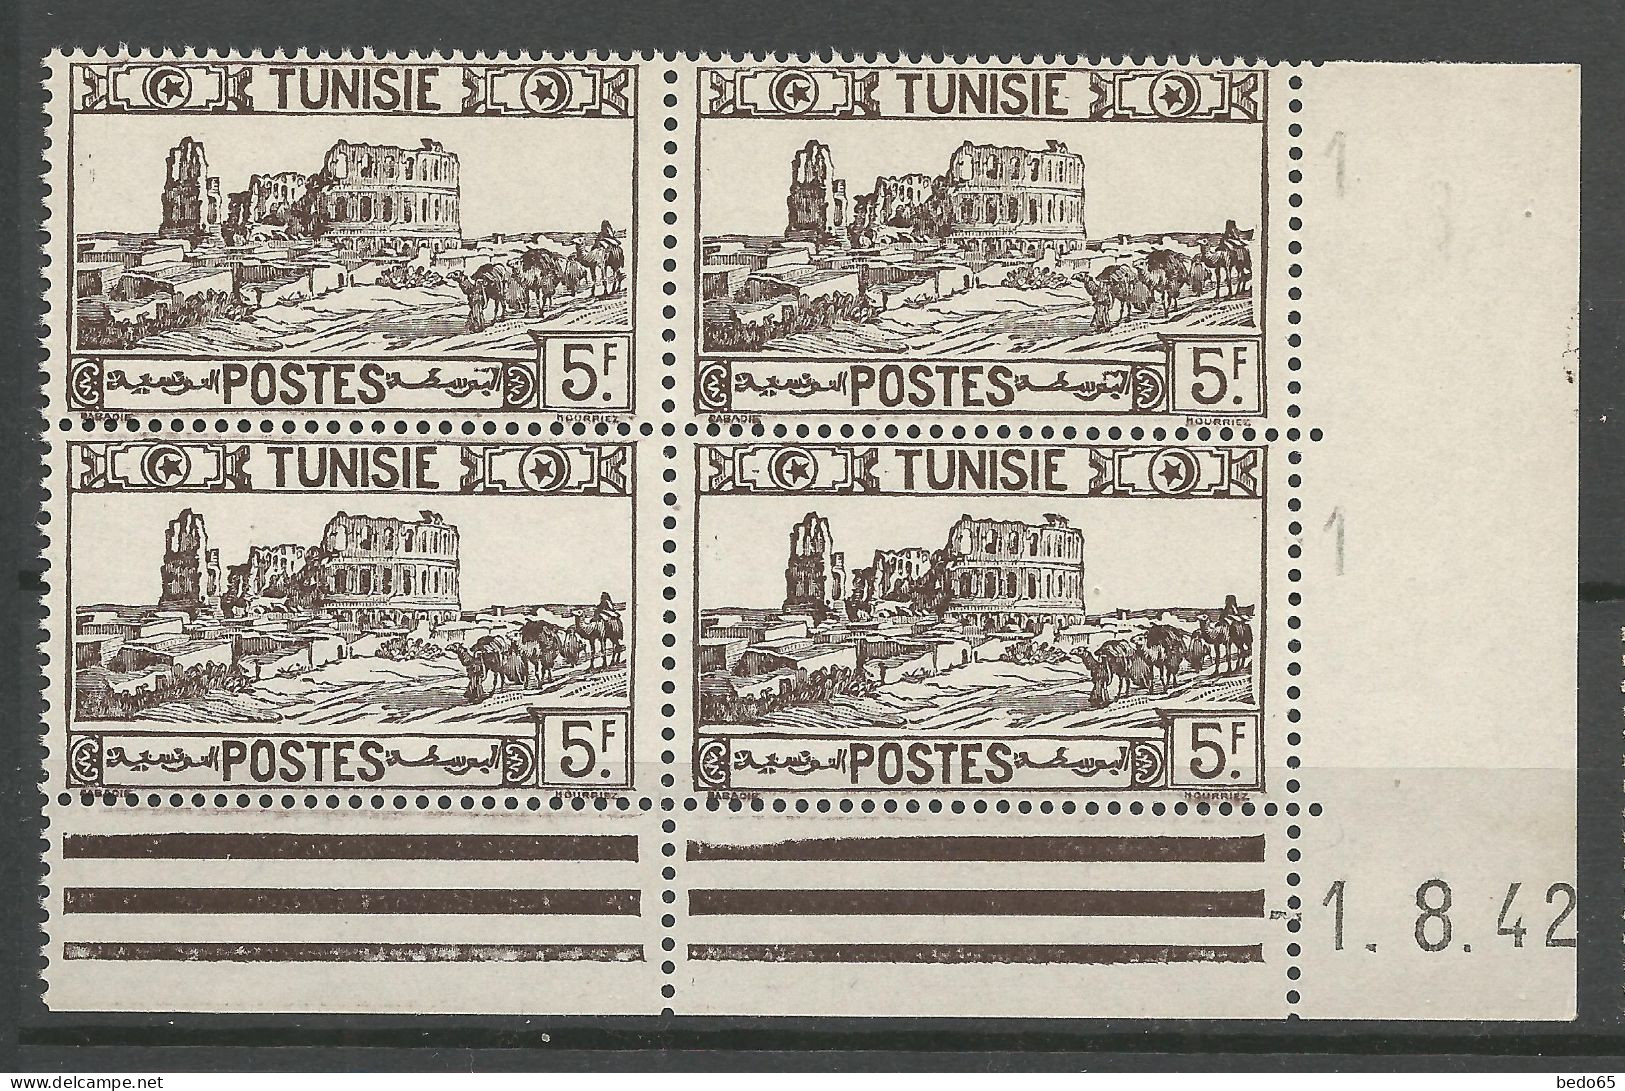 TUNISIE N° 240 Bloc De 4 Coin Daté  1 / 8 / 42 NEUF** LUXE SANS CHARNIERE NI TRACE / Hingeless  / MNH - Unused Stamps